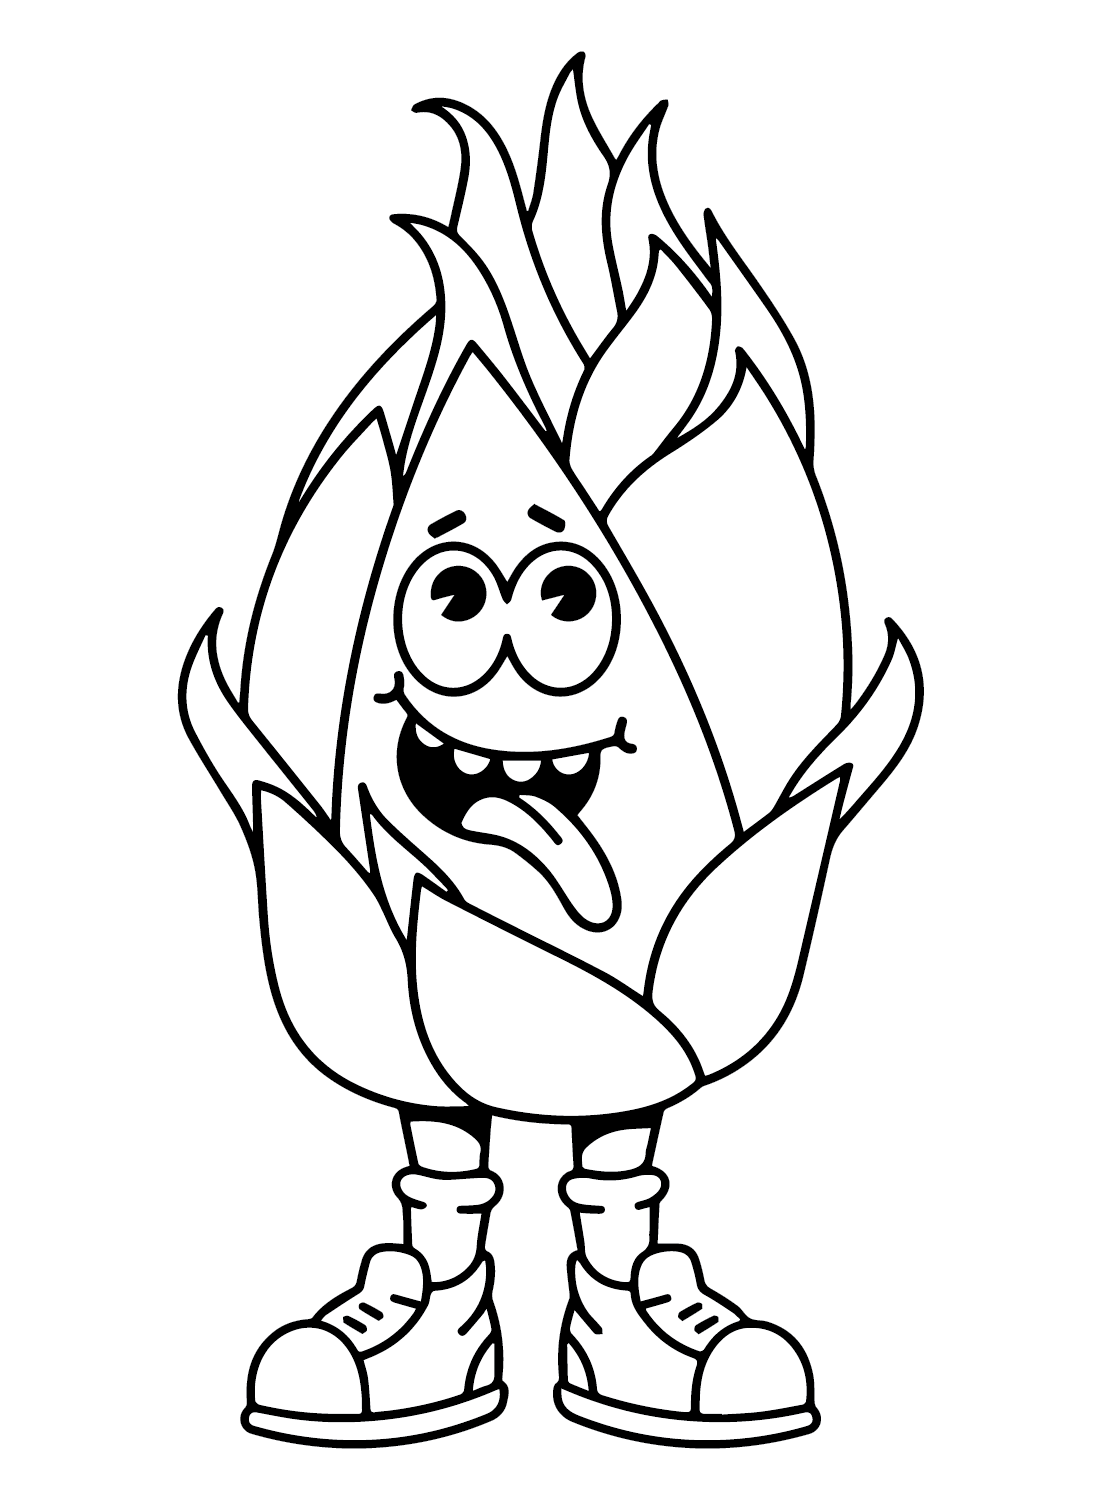 Adorable Dragon Fruit Coloring Page